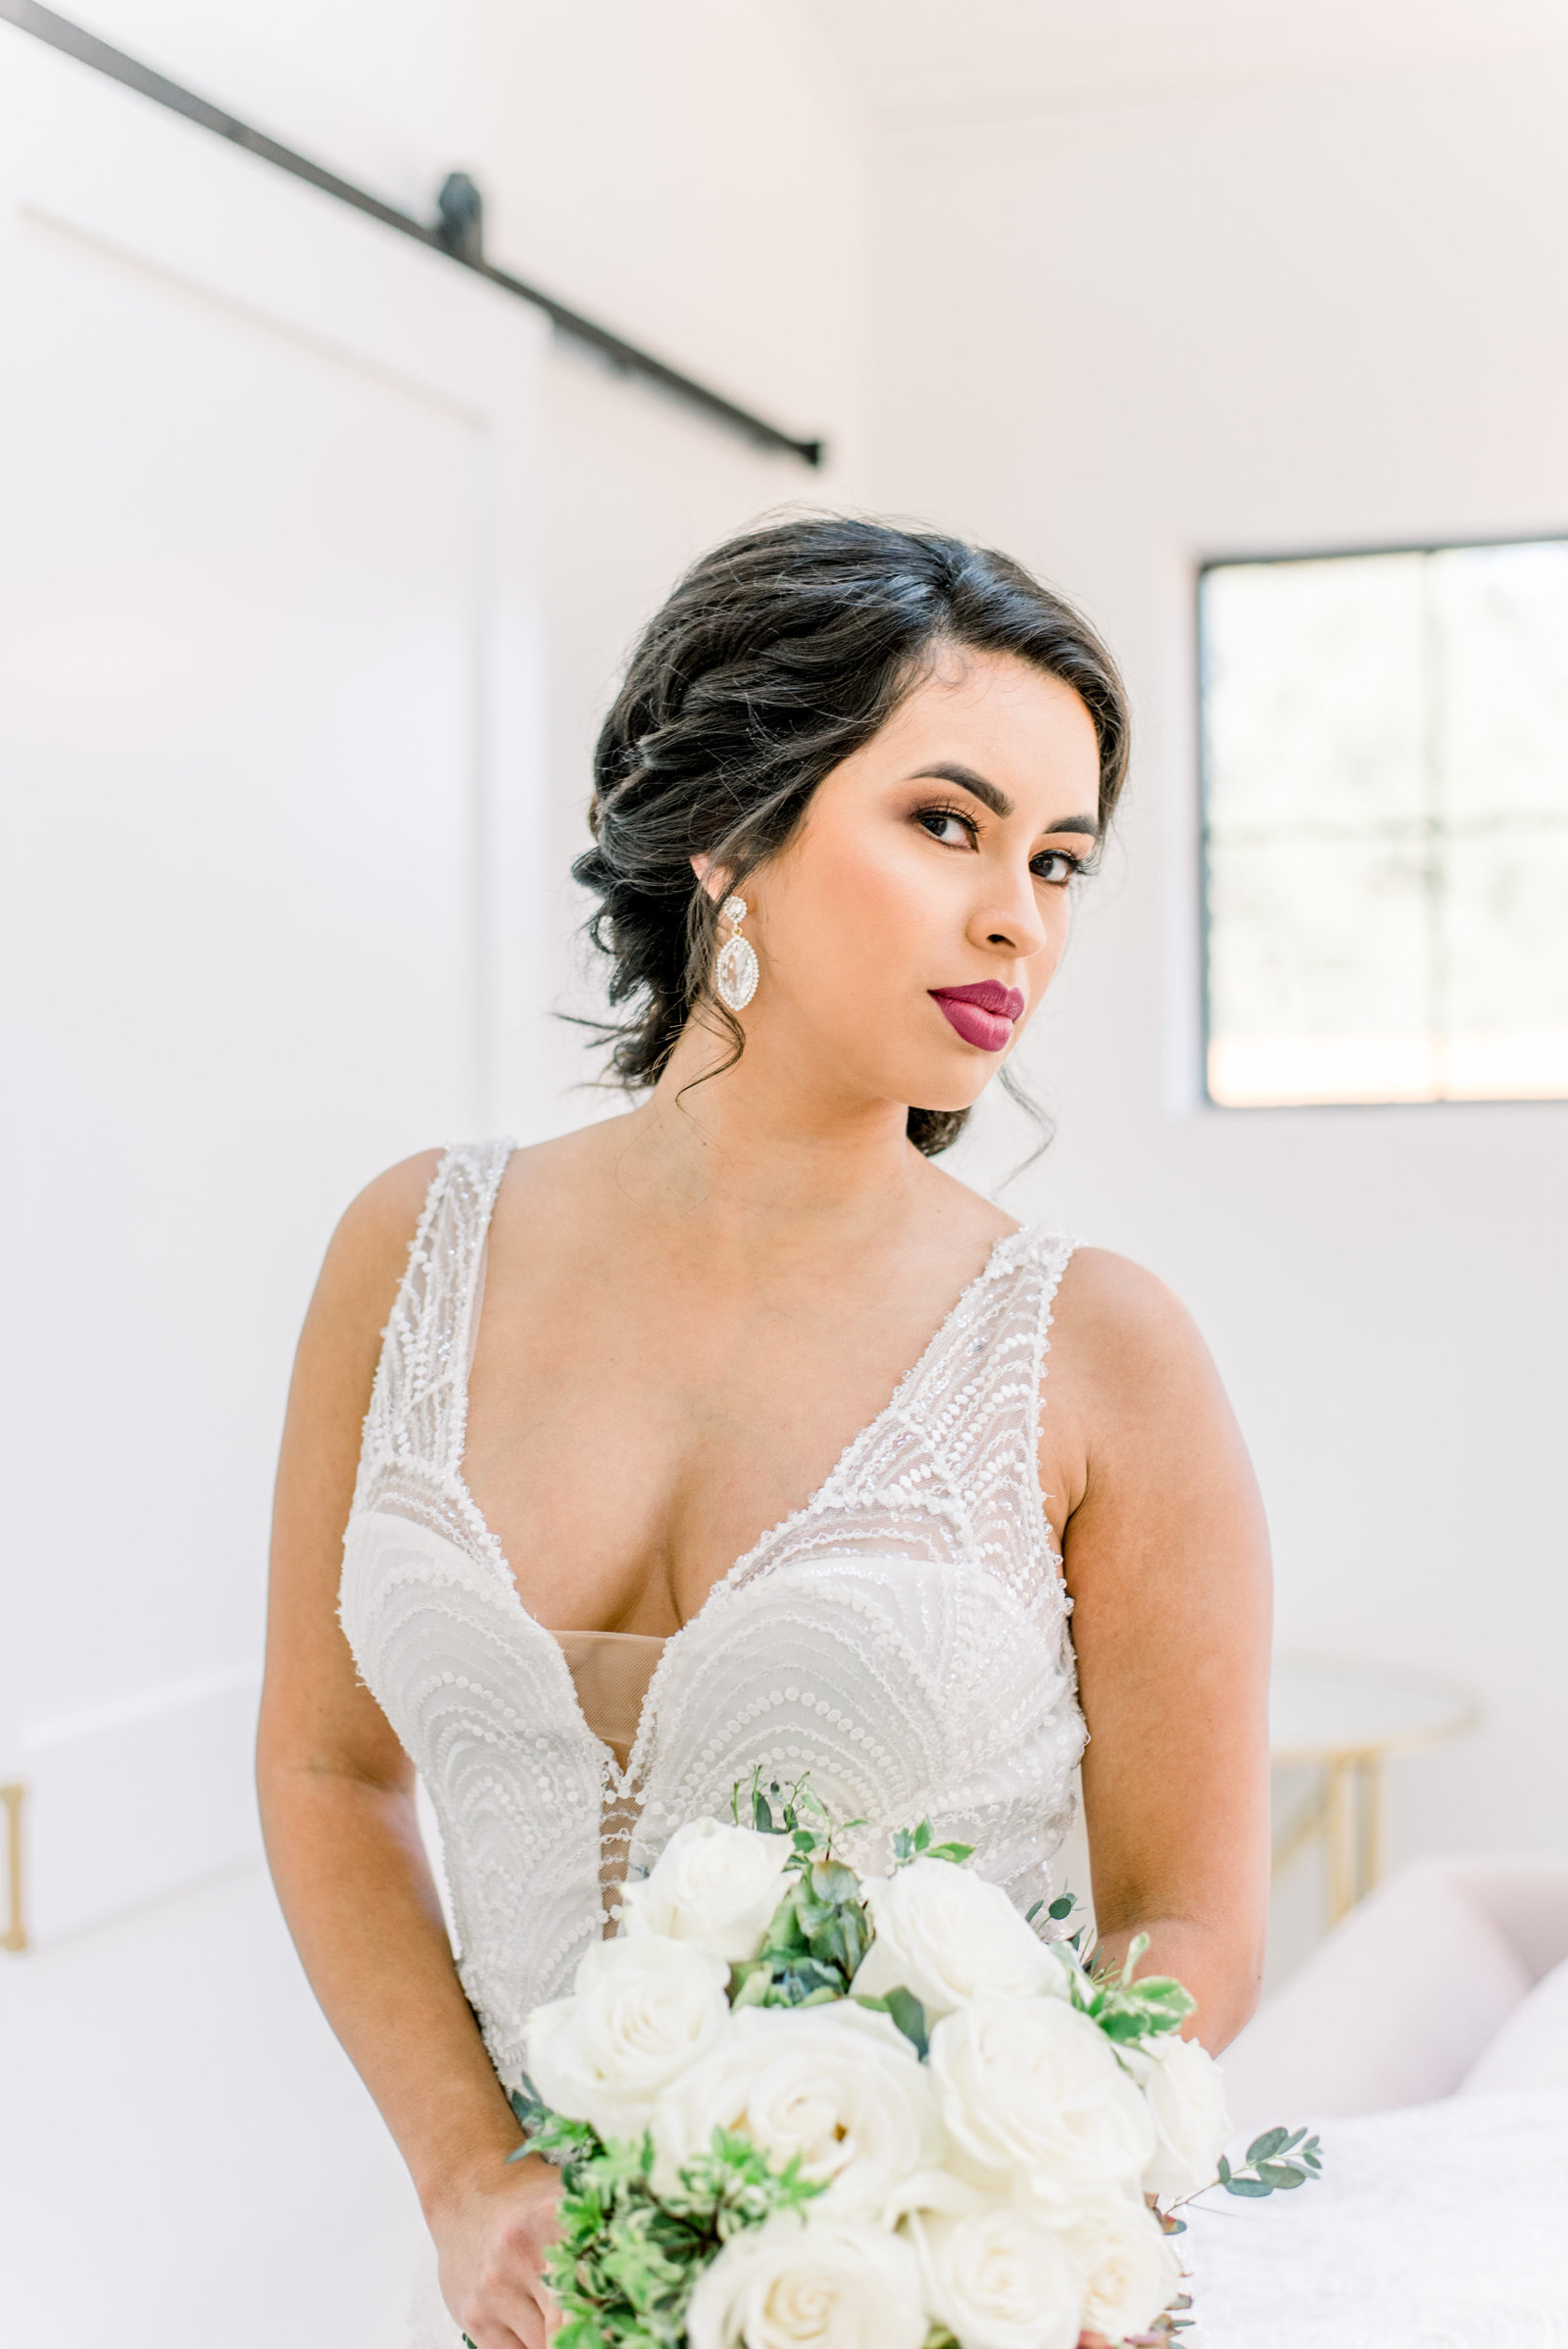 The Meekermark Bridal Session | Jessica Lucile Photography